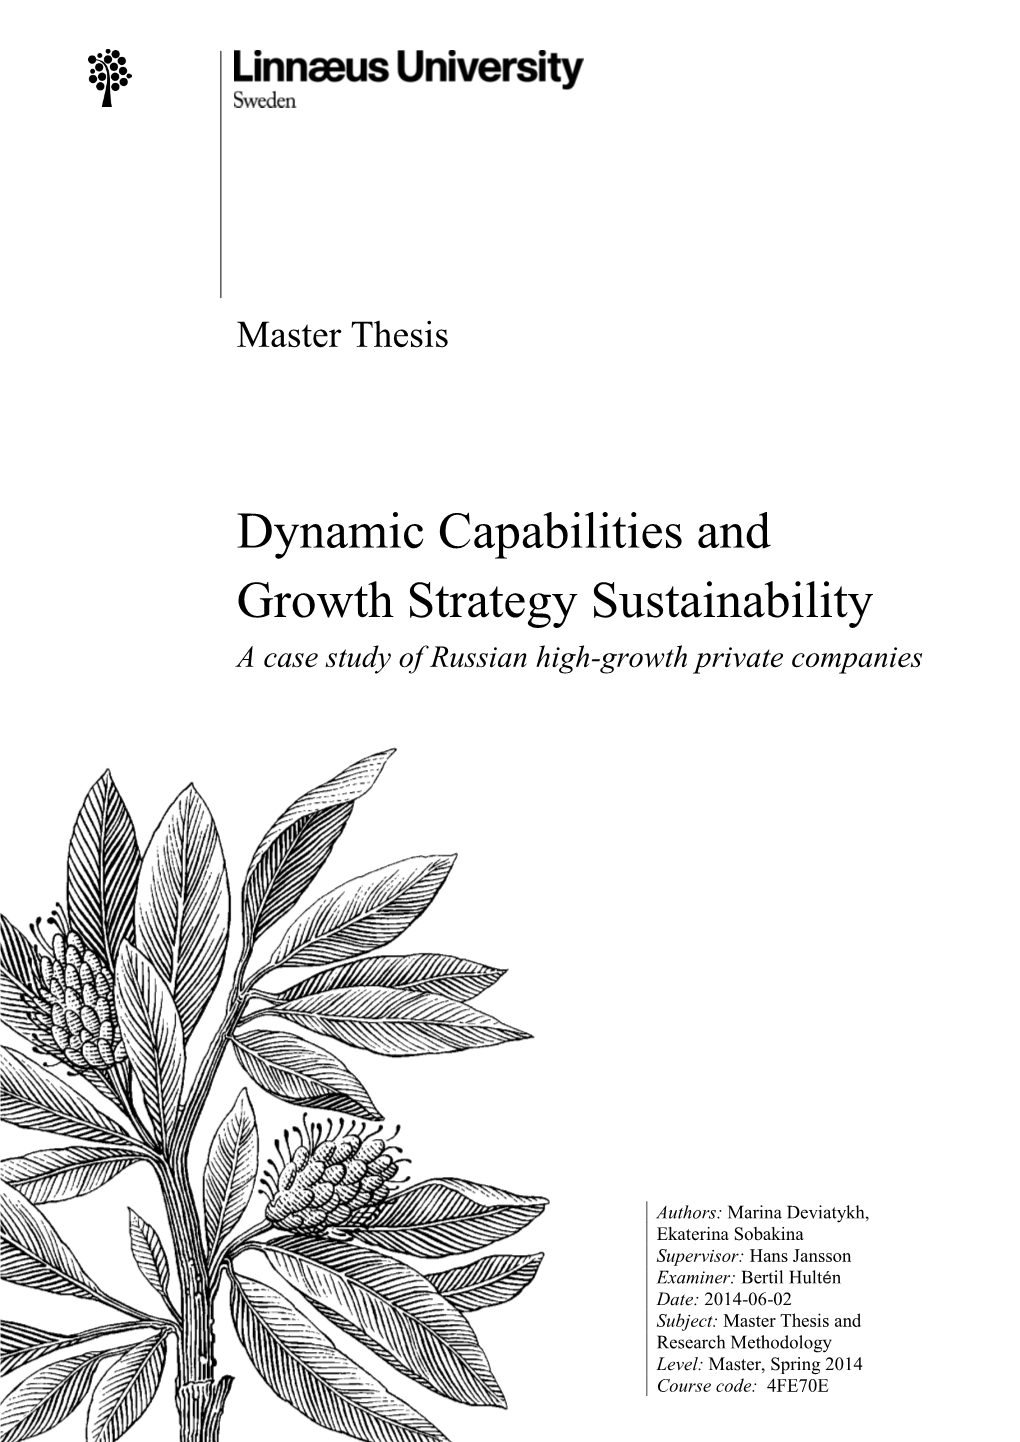 Dynamic Capabilities and Growth Strategy Sustainability a Case Study of Russian High-Growth Private Companies